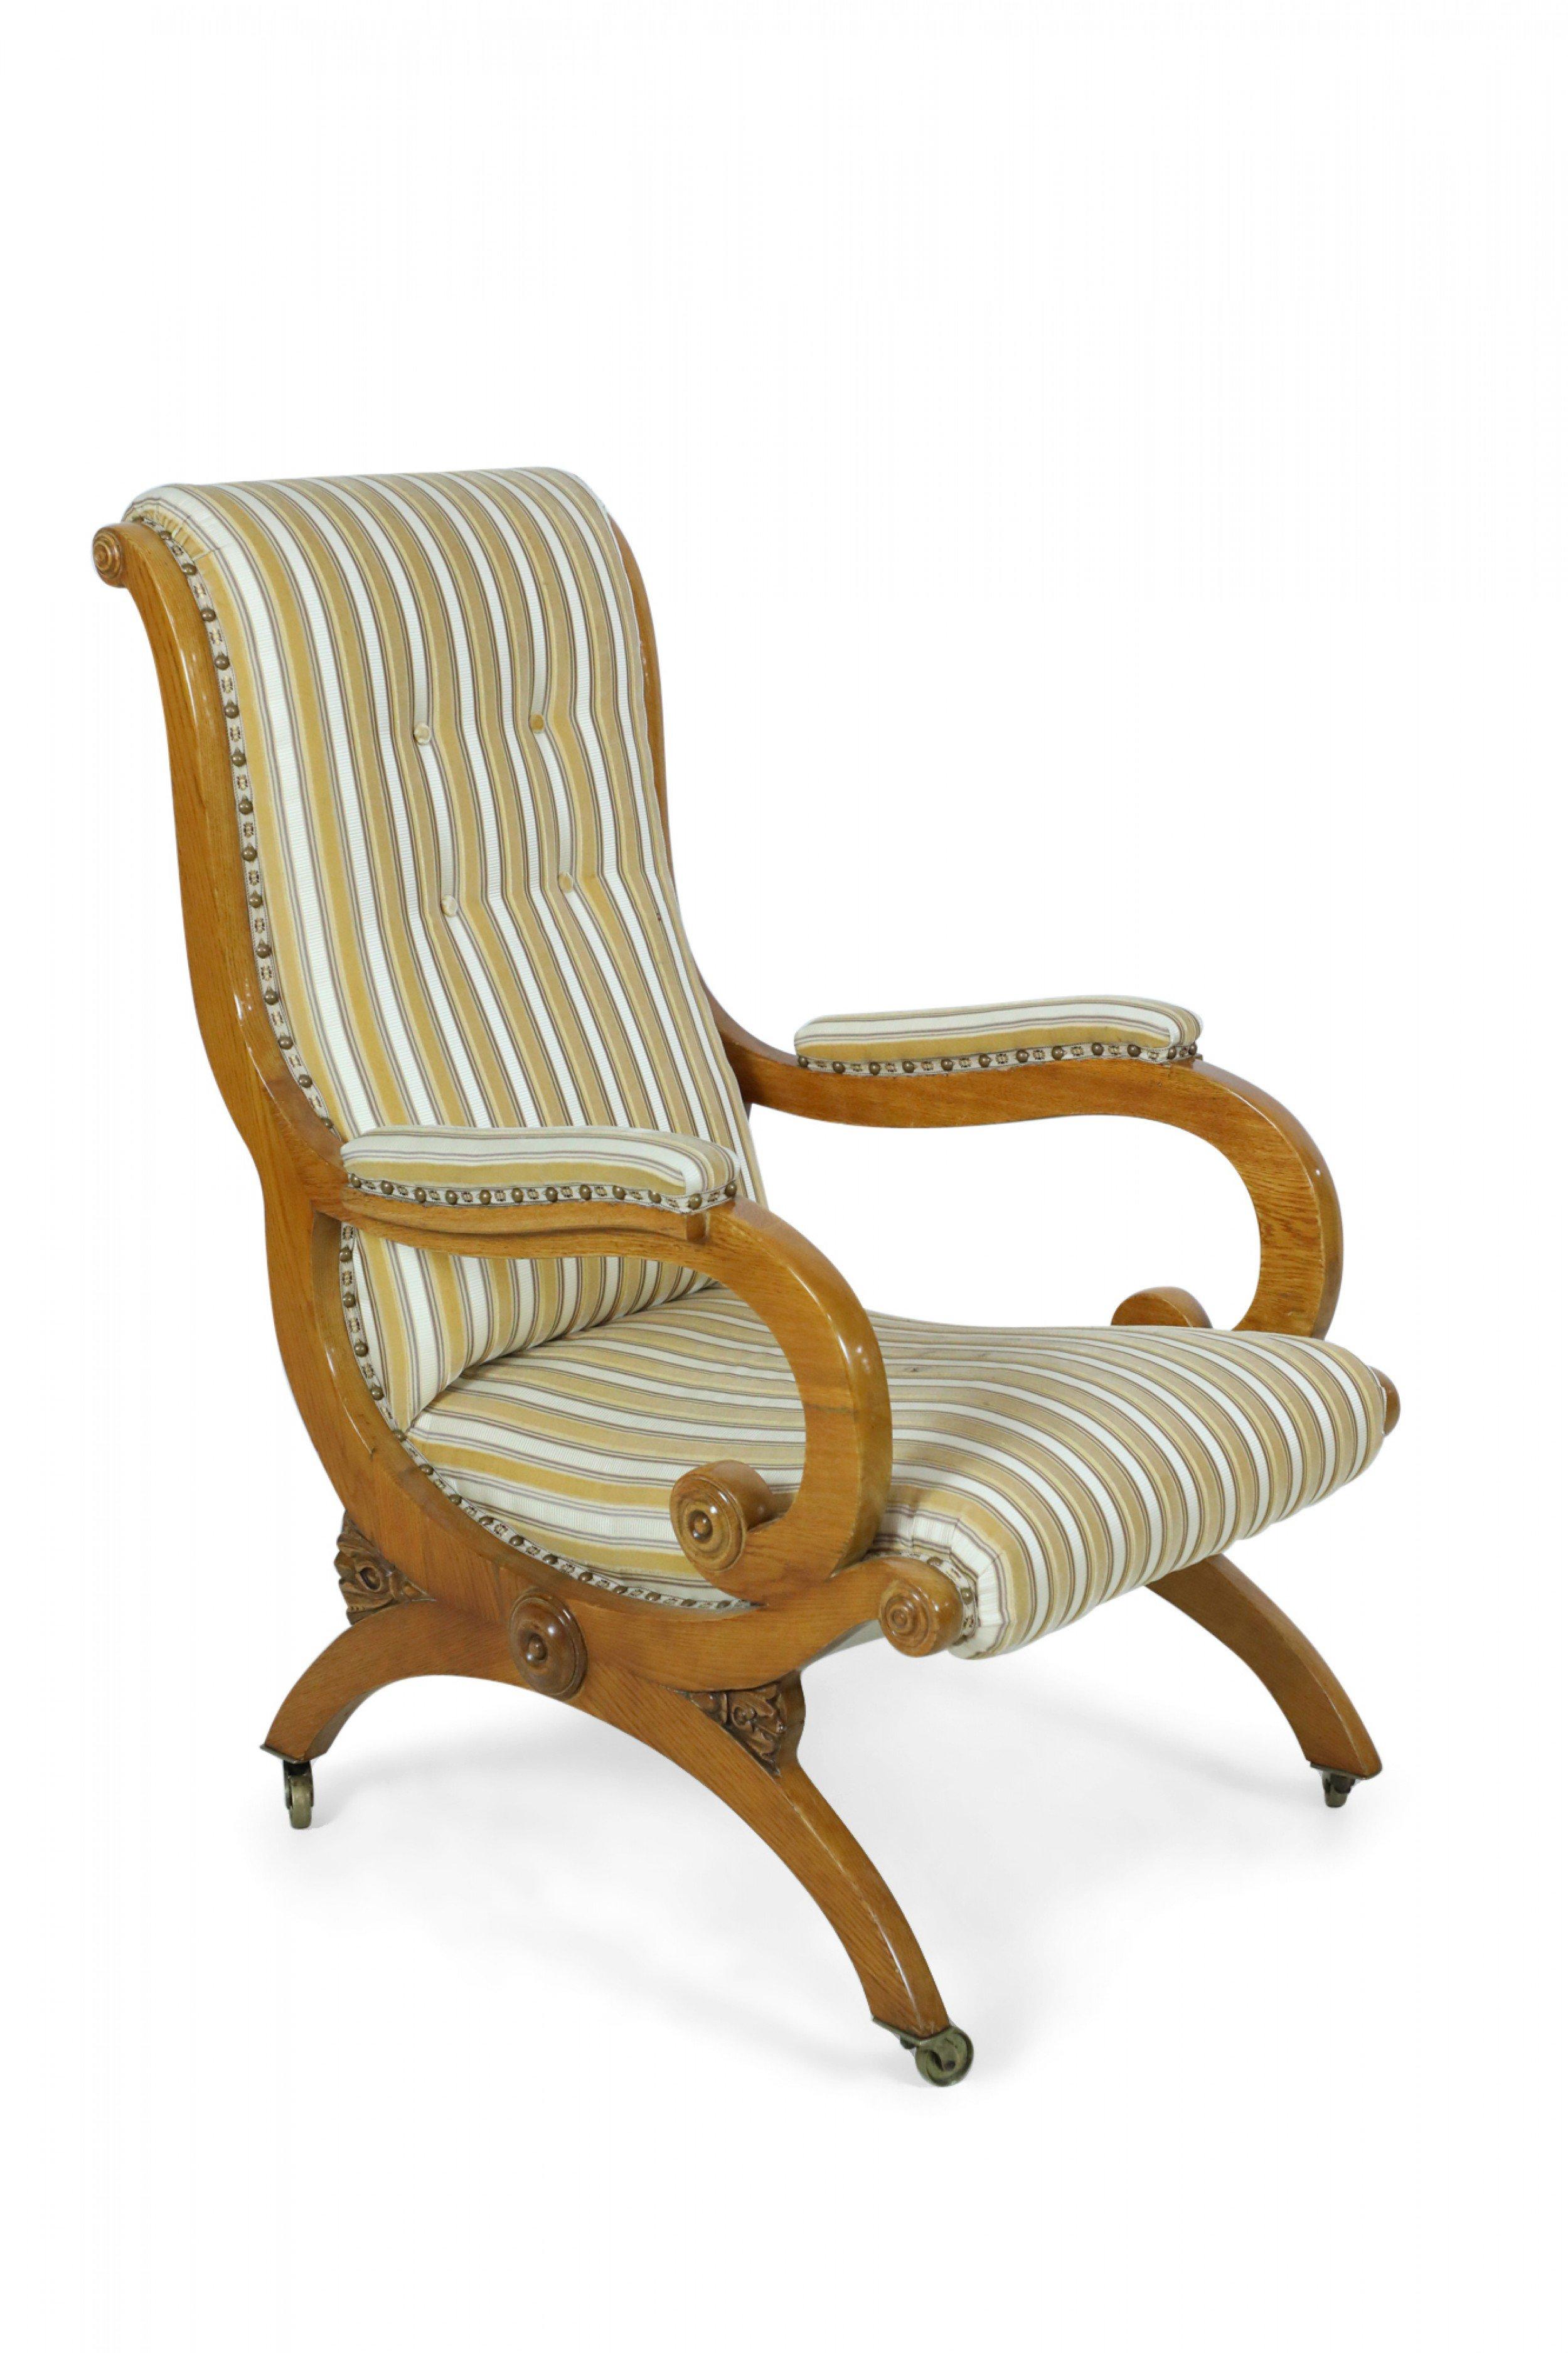 English Victorian Blond Wood Scroll Armchair with Striped Upholstery For Sale 3